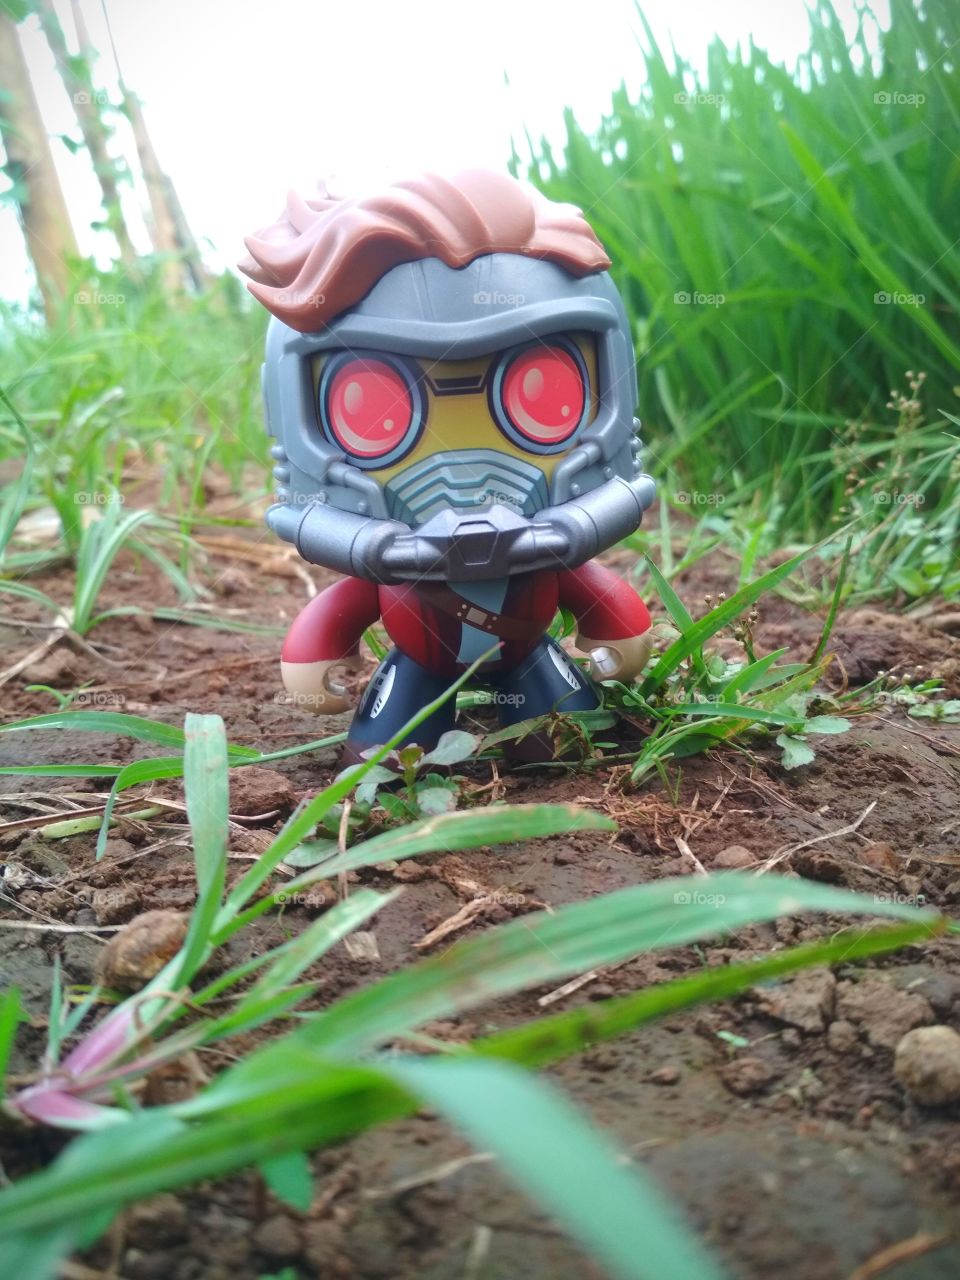 the star lord toy stares at the camera